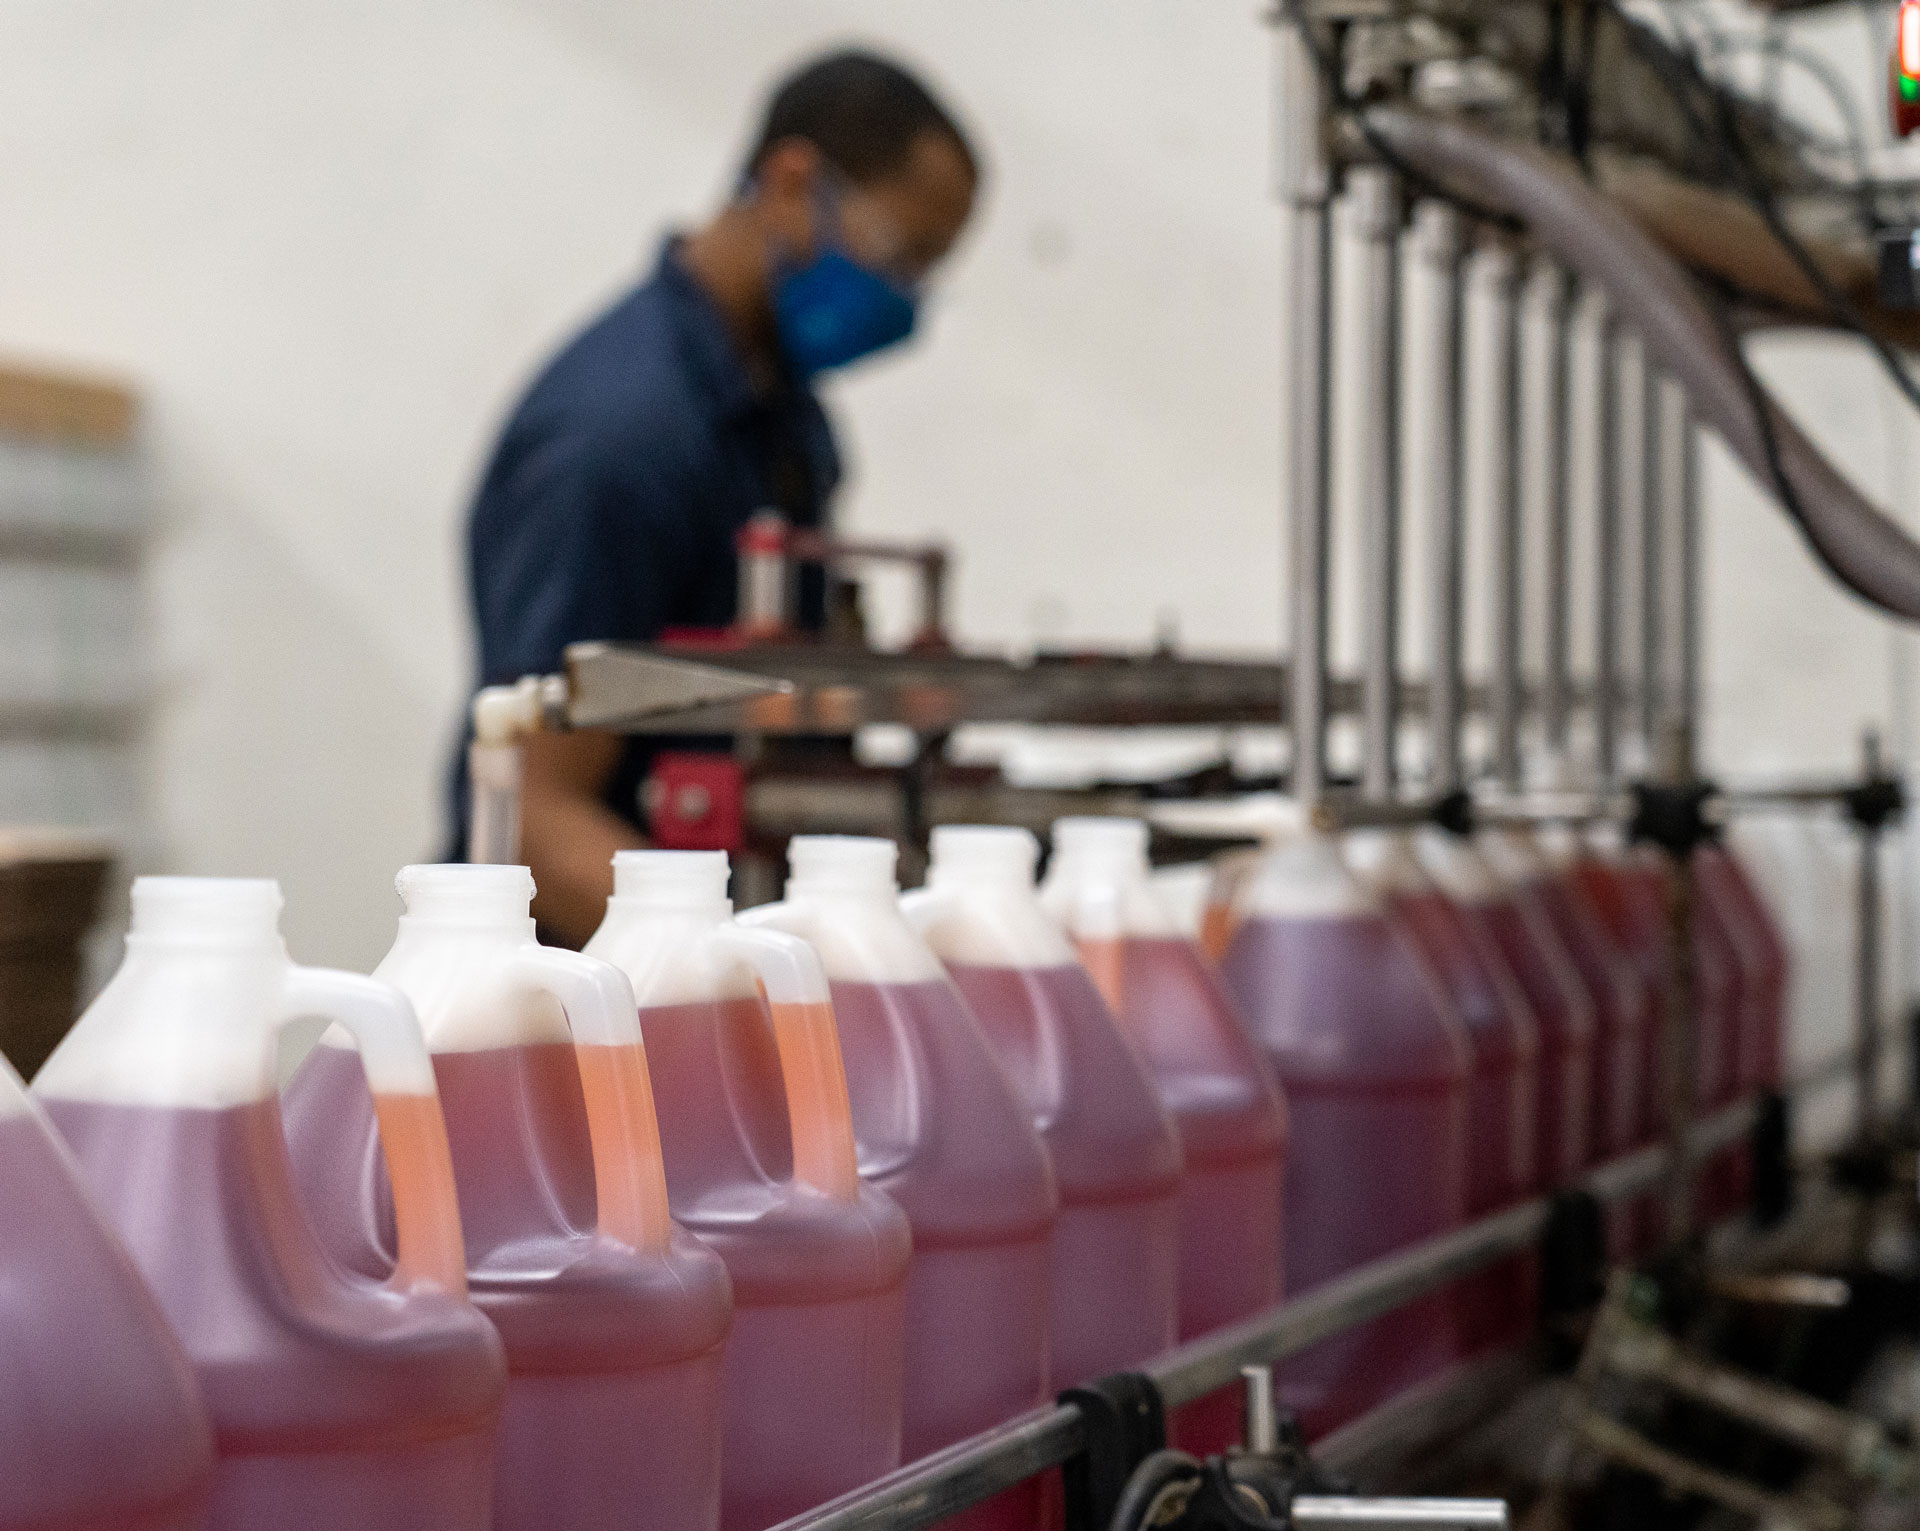 A line of bottles being filled with cleaning solution.